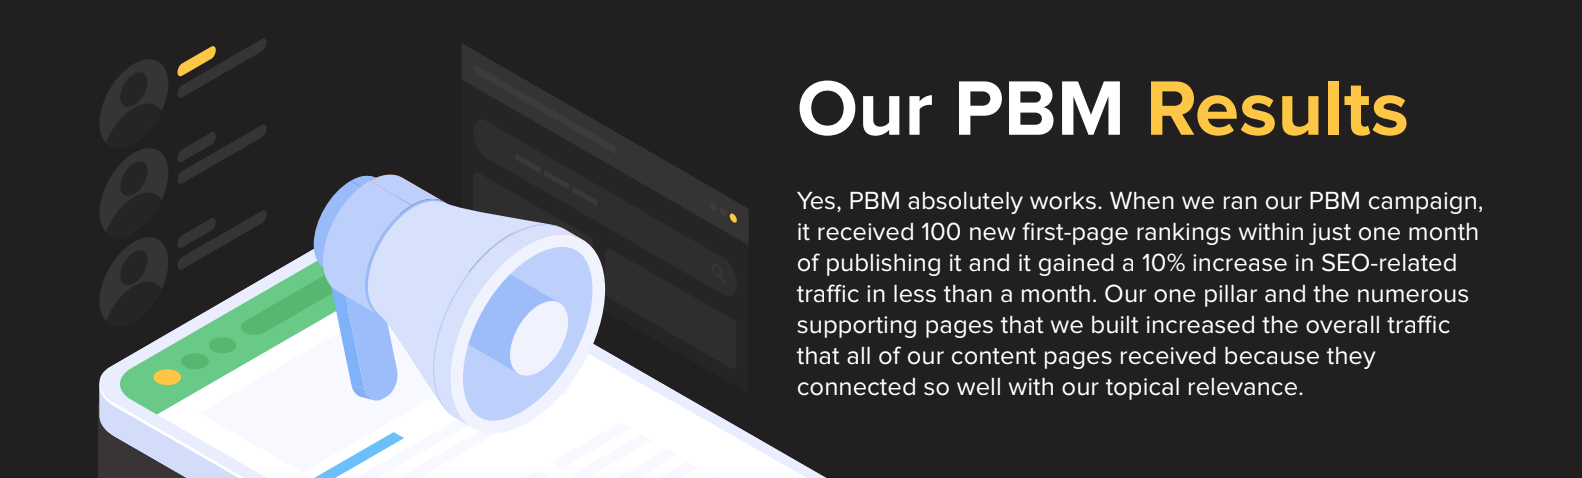 Our PBM Results